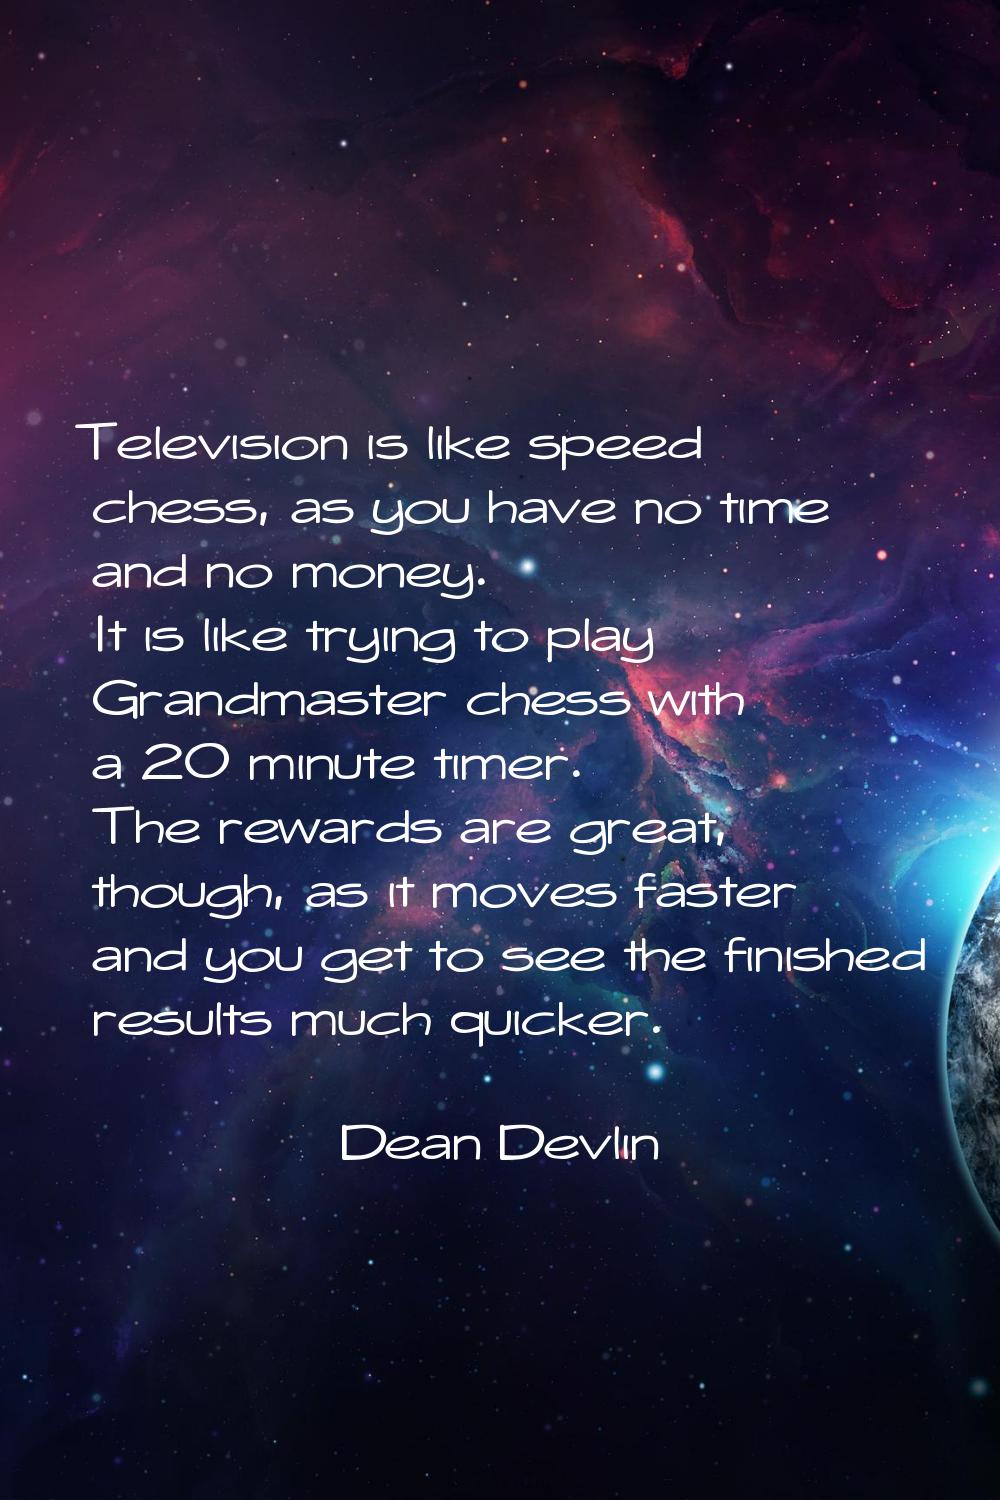 Television is like speed chess, as you have no time and no money. It is like trying to play Grandma